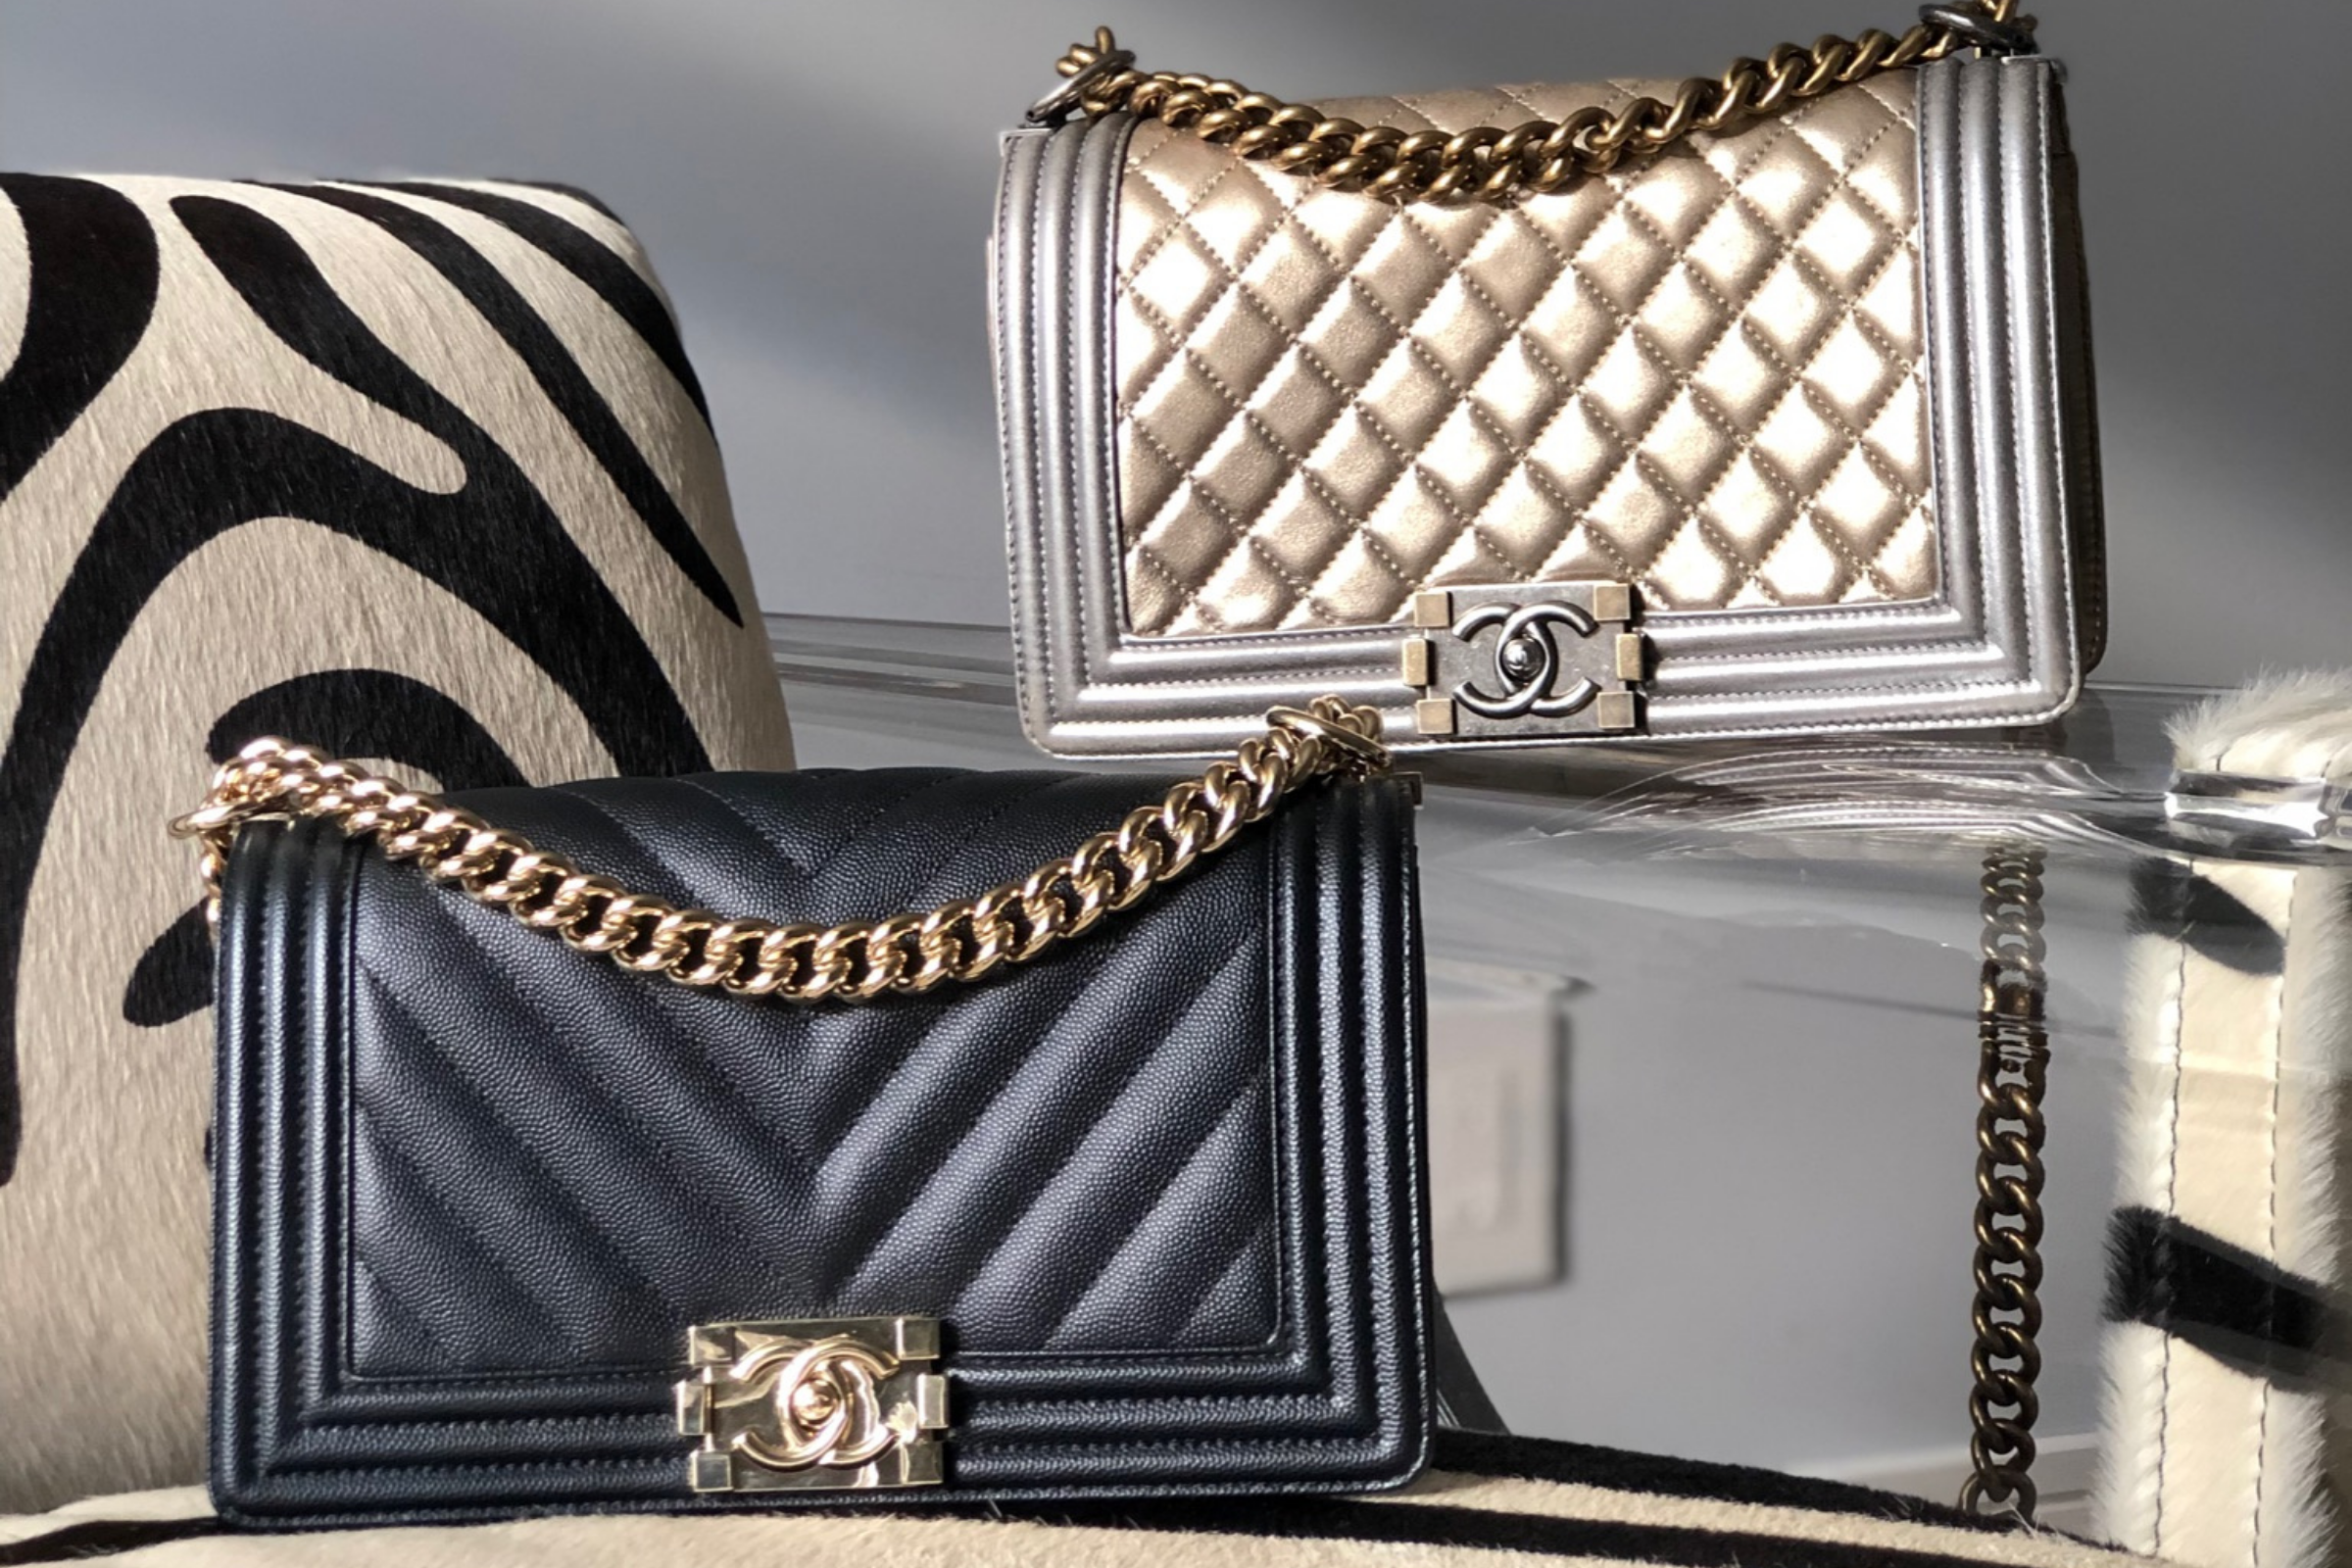 How To Authenticate A Chanel Handbag - FIVE Quick Tips! - Fashion